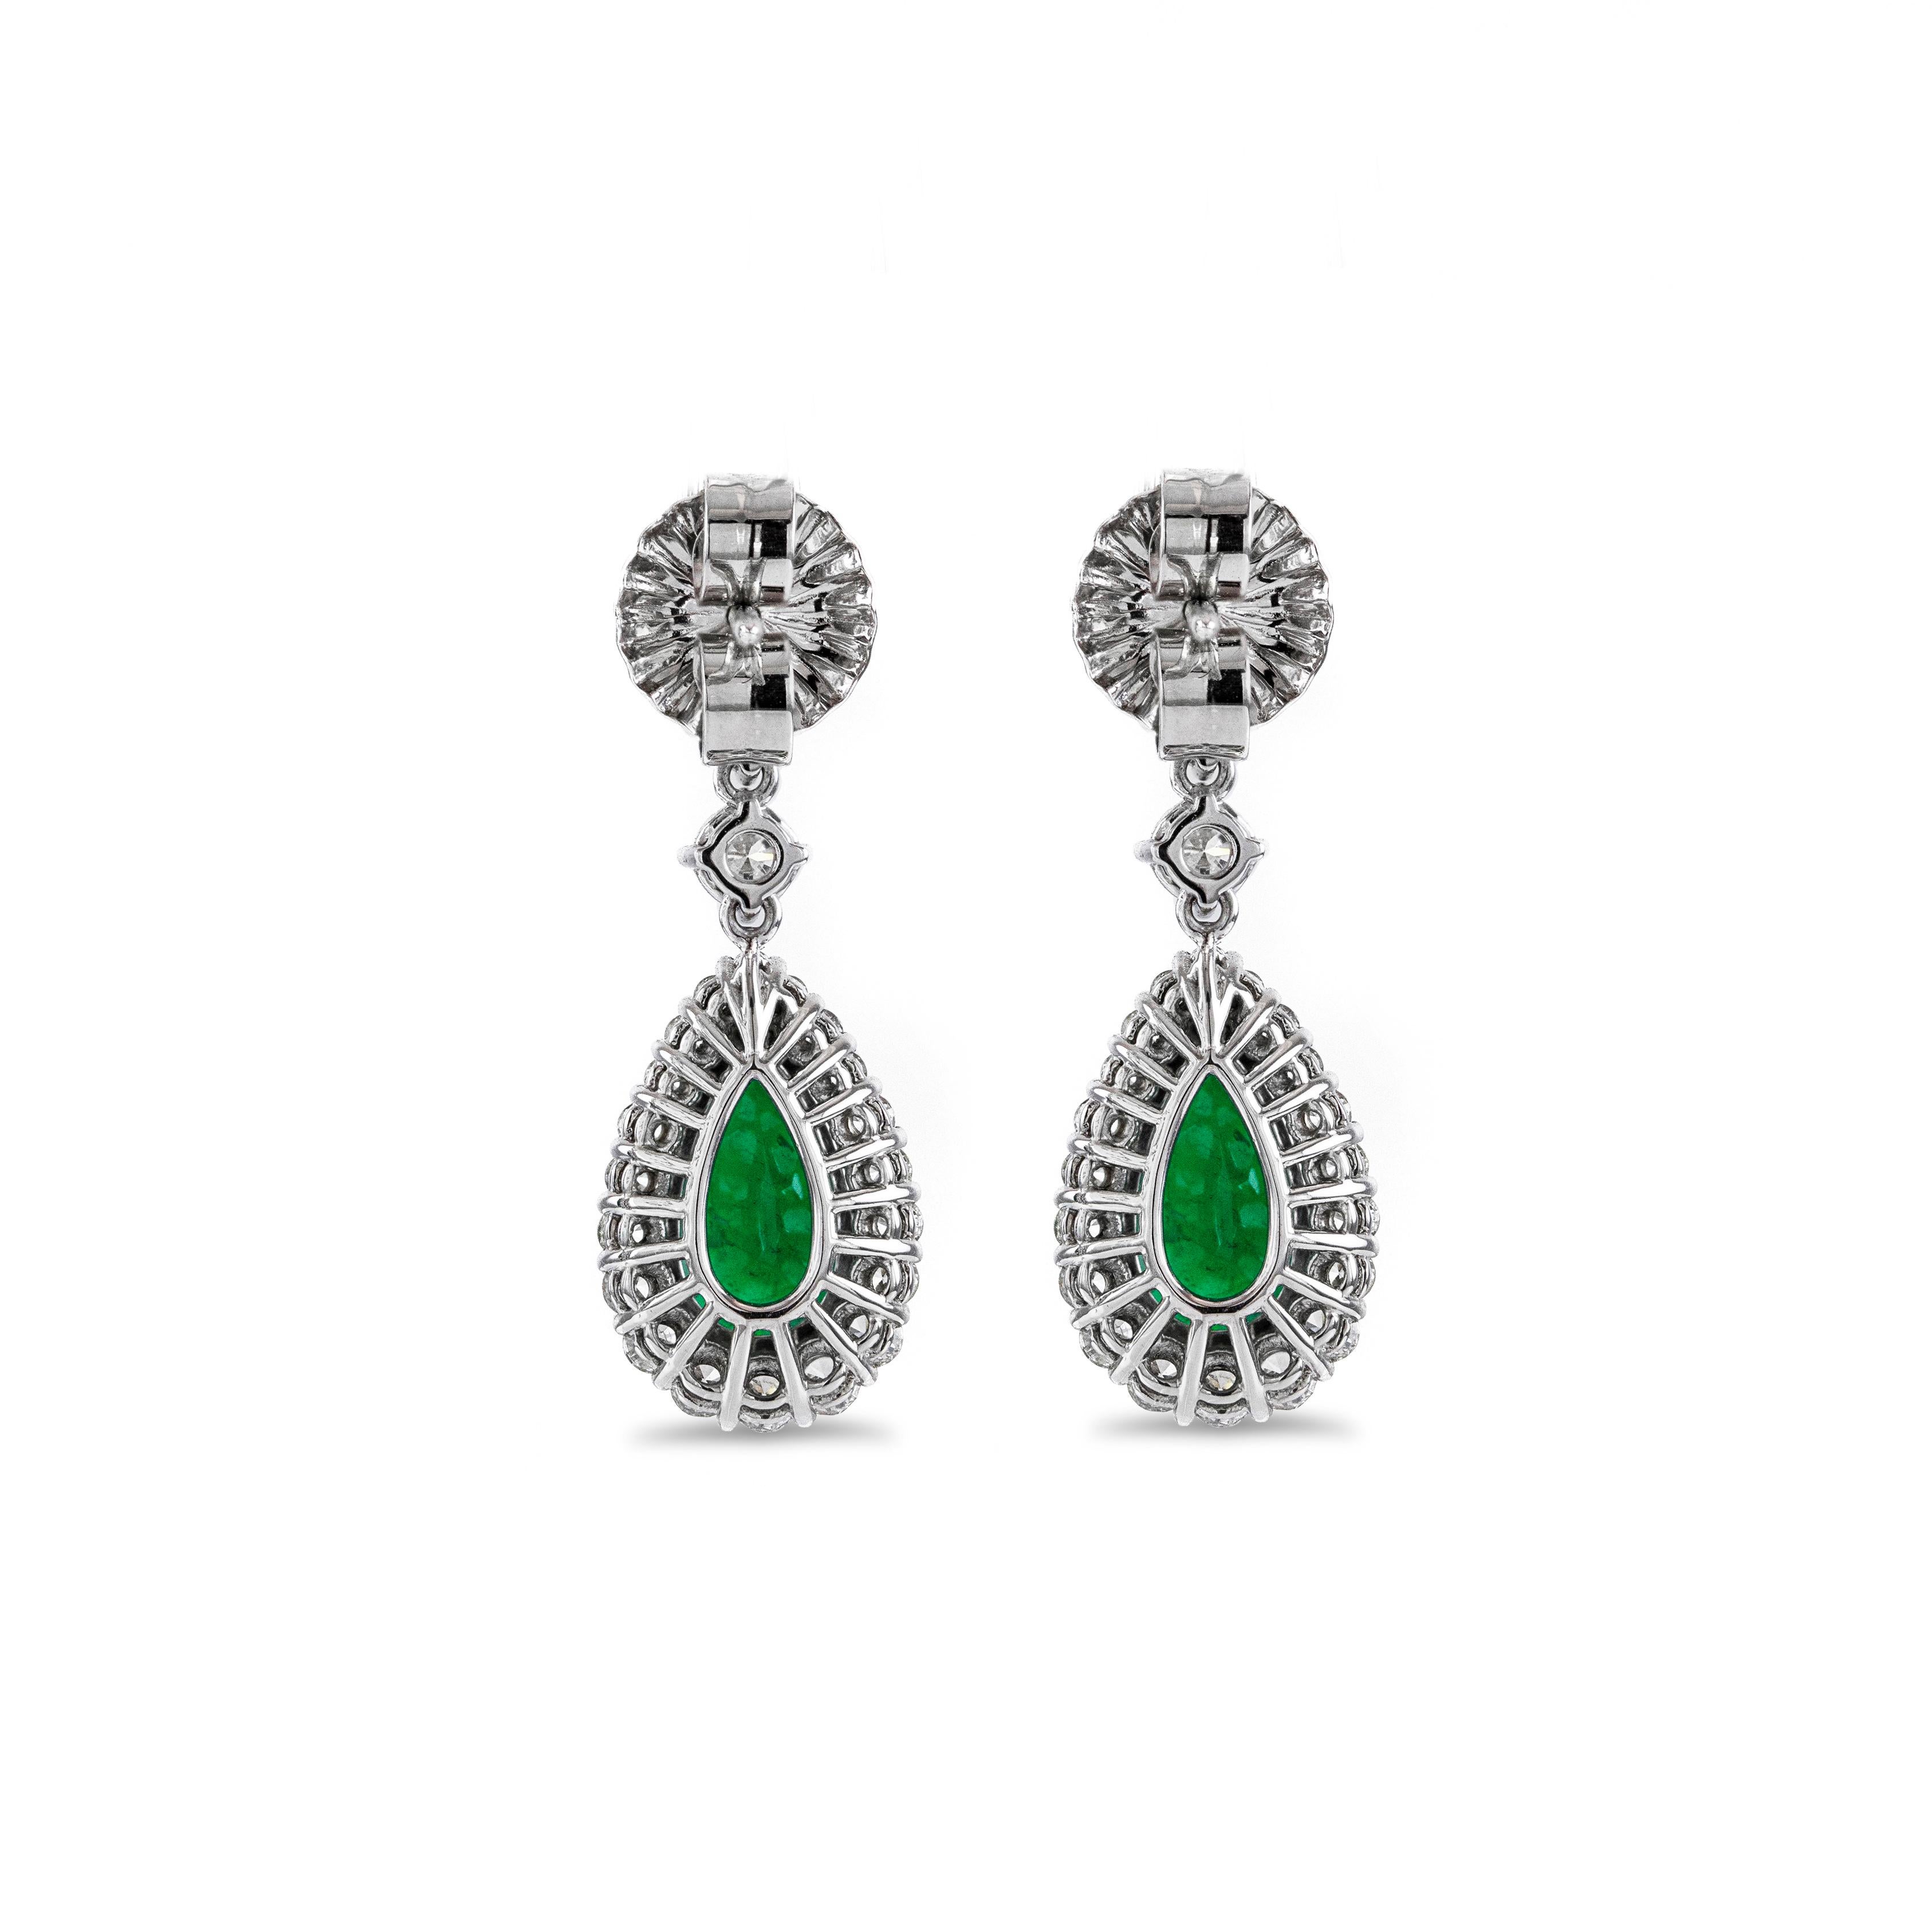 This chic and beautiful drop earrings showcases pear shape green emeralds weighing 3.37 carats total, surrounded by a single row of round brilliant diamond and suspended on graduating round brilliant diamonds. Diamonds weigh 1.58 carats total.